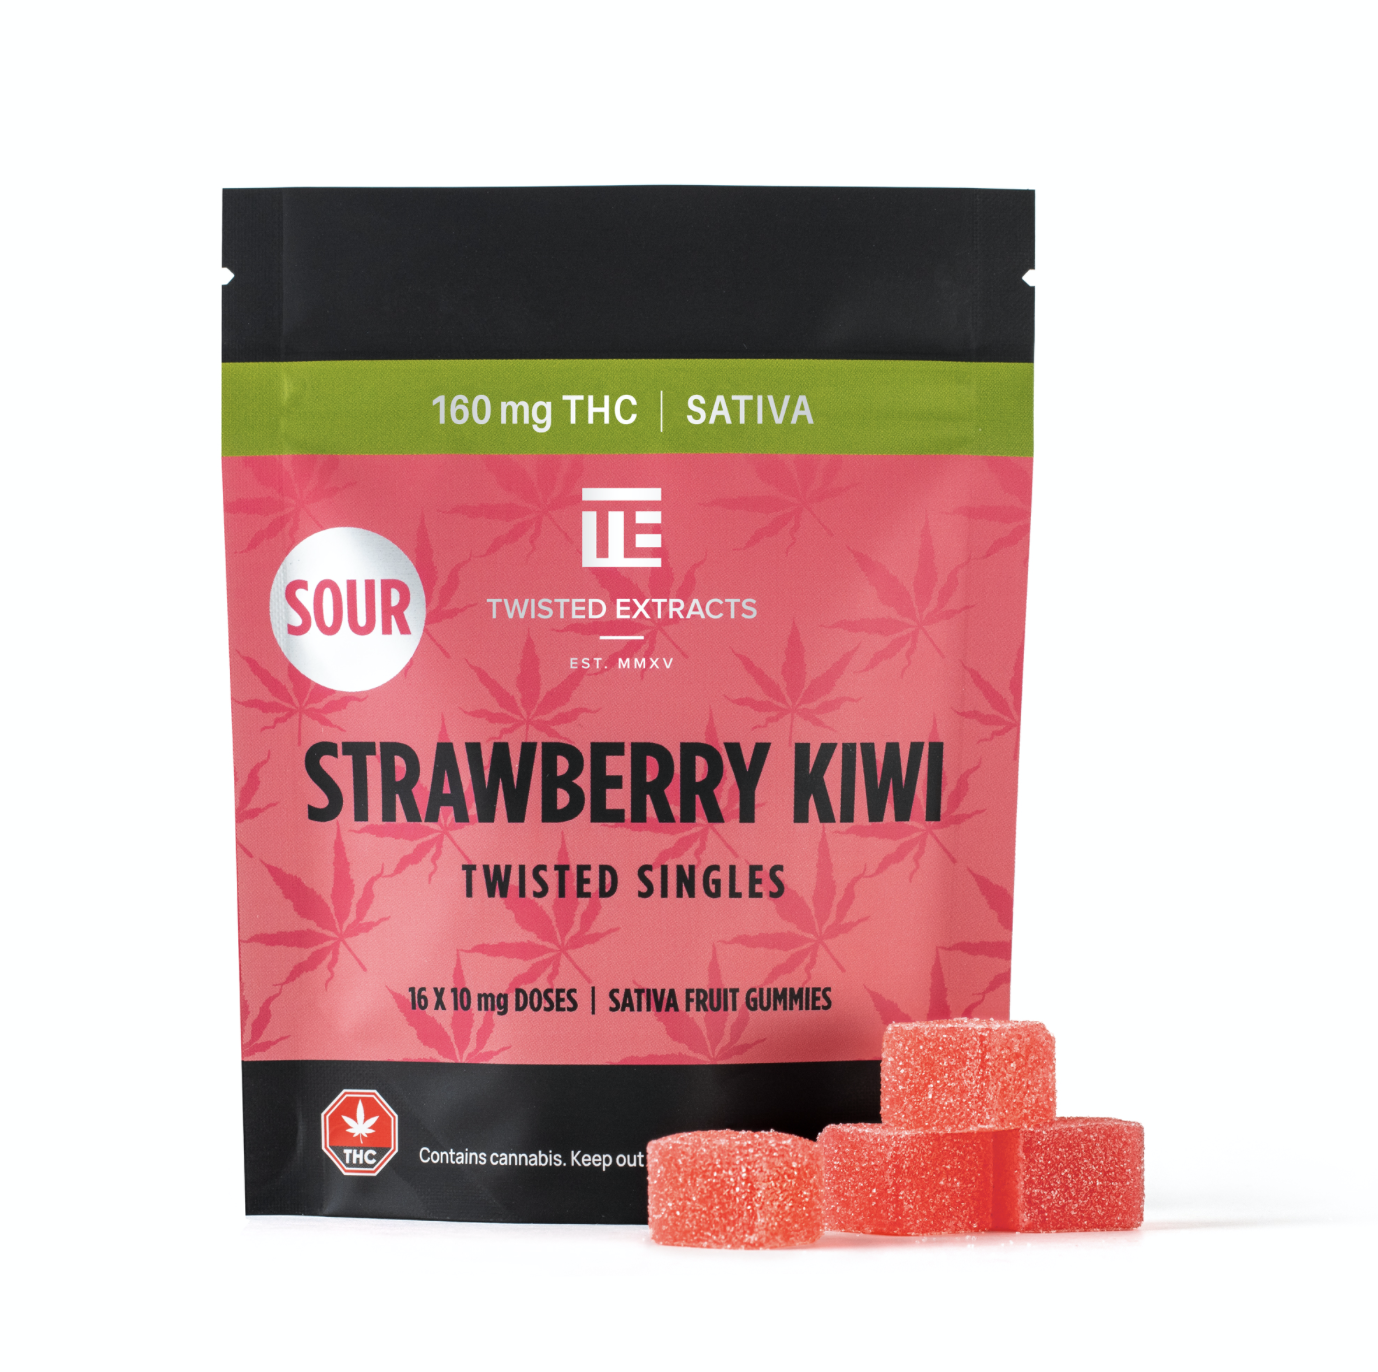 Buy Twisted Extracts – Sour Strawberry Kiwi Twisted Singles 160mg THC Sativa at Wccannabis Online Shop